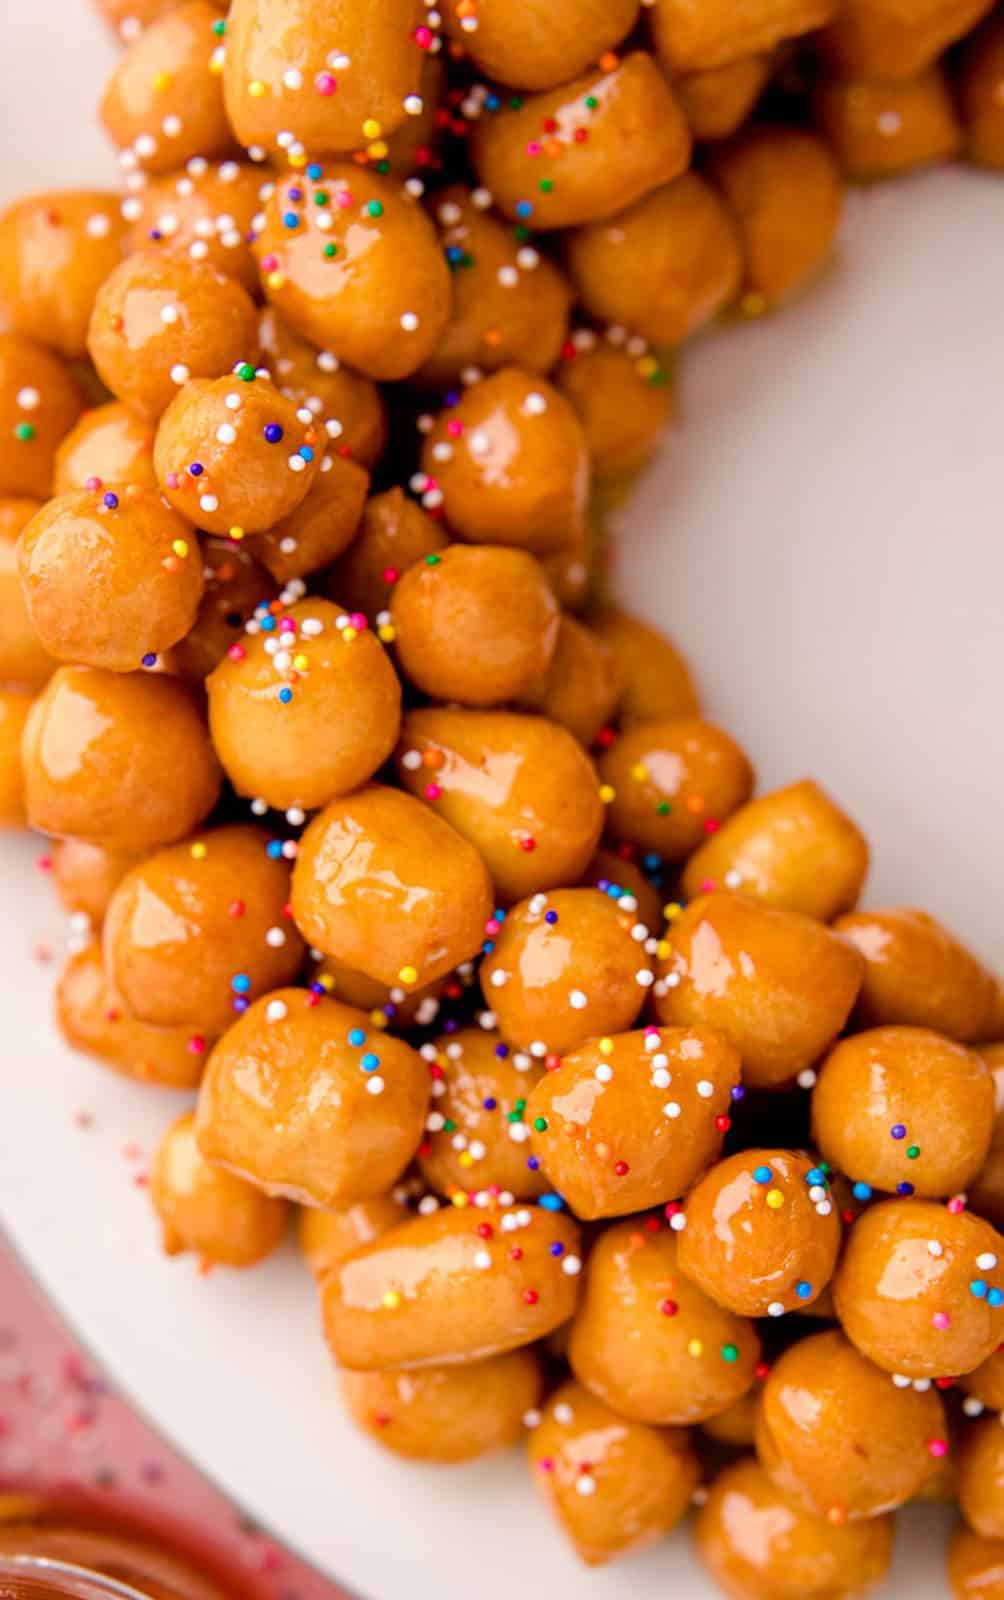 Overhead close up of side of recipe showing coated balls and sprinkles.